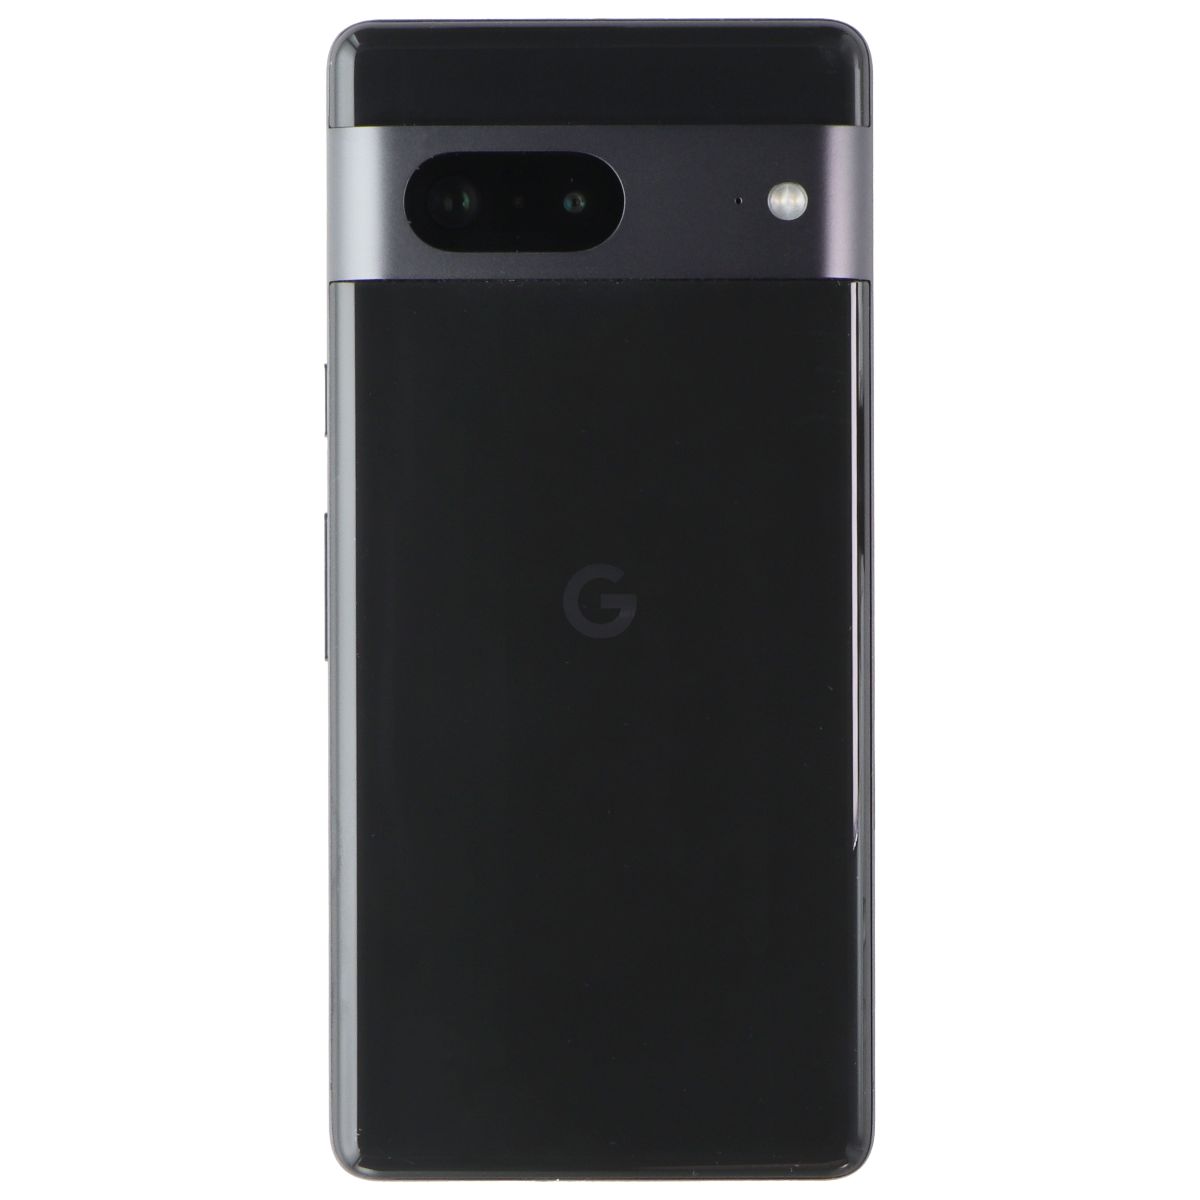 Google Pixel 7 (6.3-inch) Smartphone (GVU6C) Verizon Only 256GB / Obsidian Cell Phones & Smartphones Google    - Simple Cell Bulk Wholesale Pricing - USA Seller